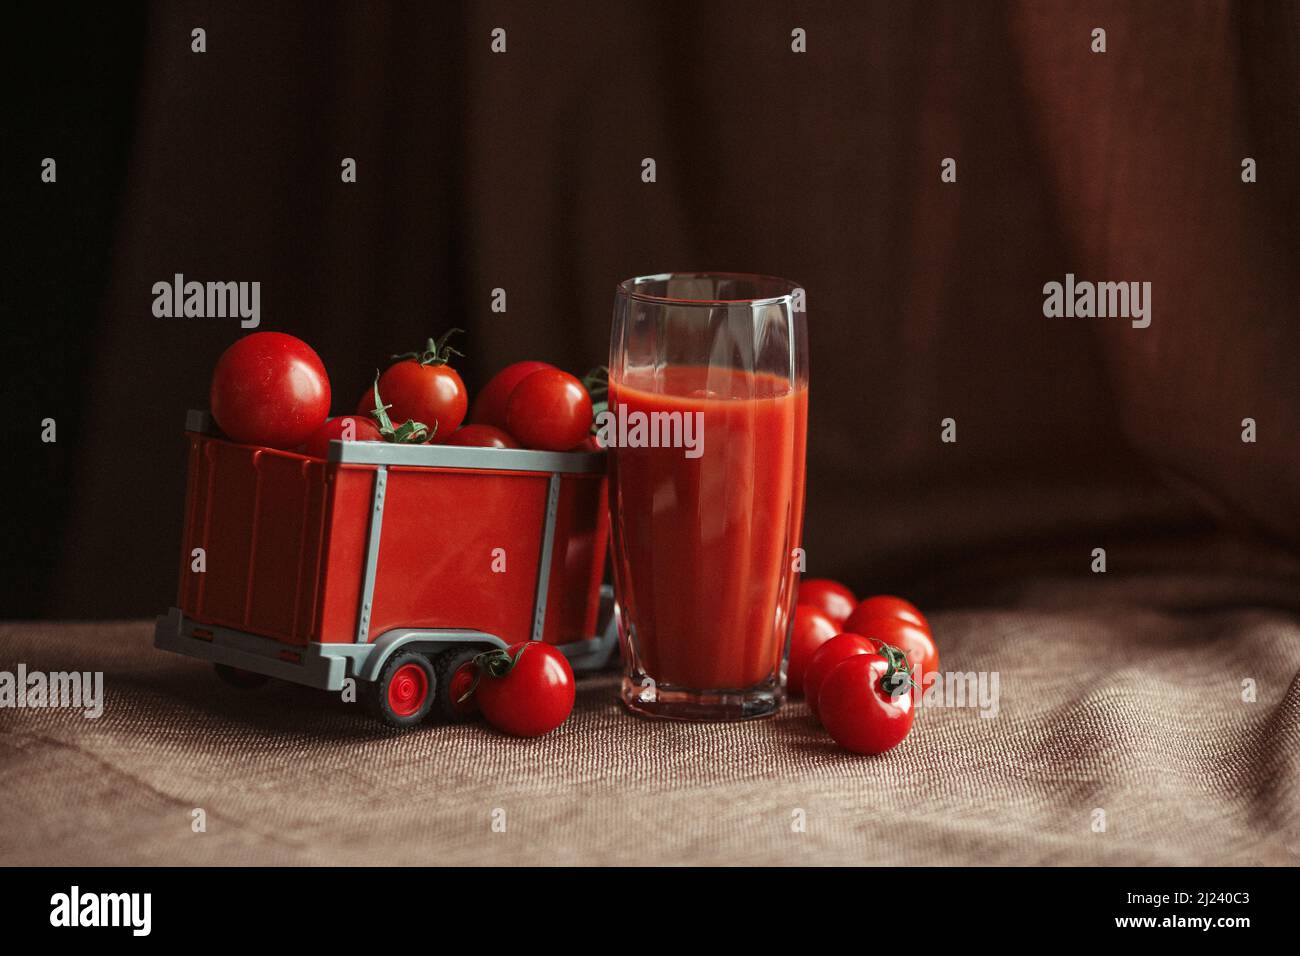 tomatoes in a toy trailer tomato juice in a glass Stock Photo